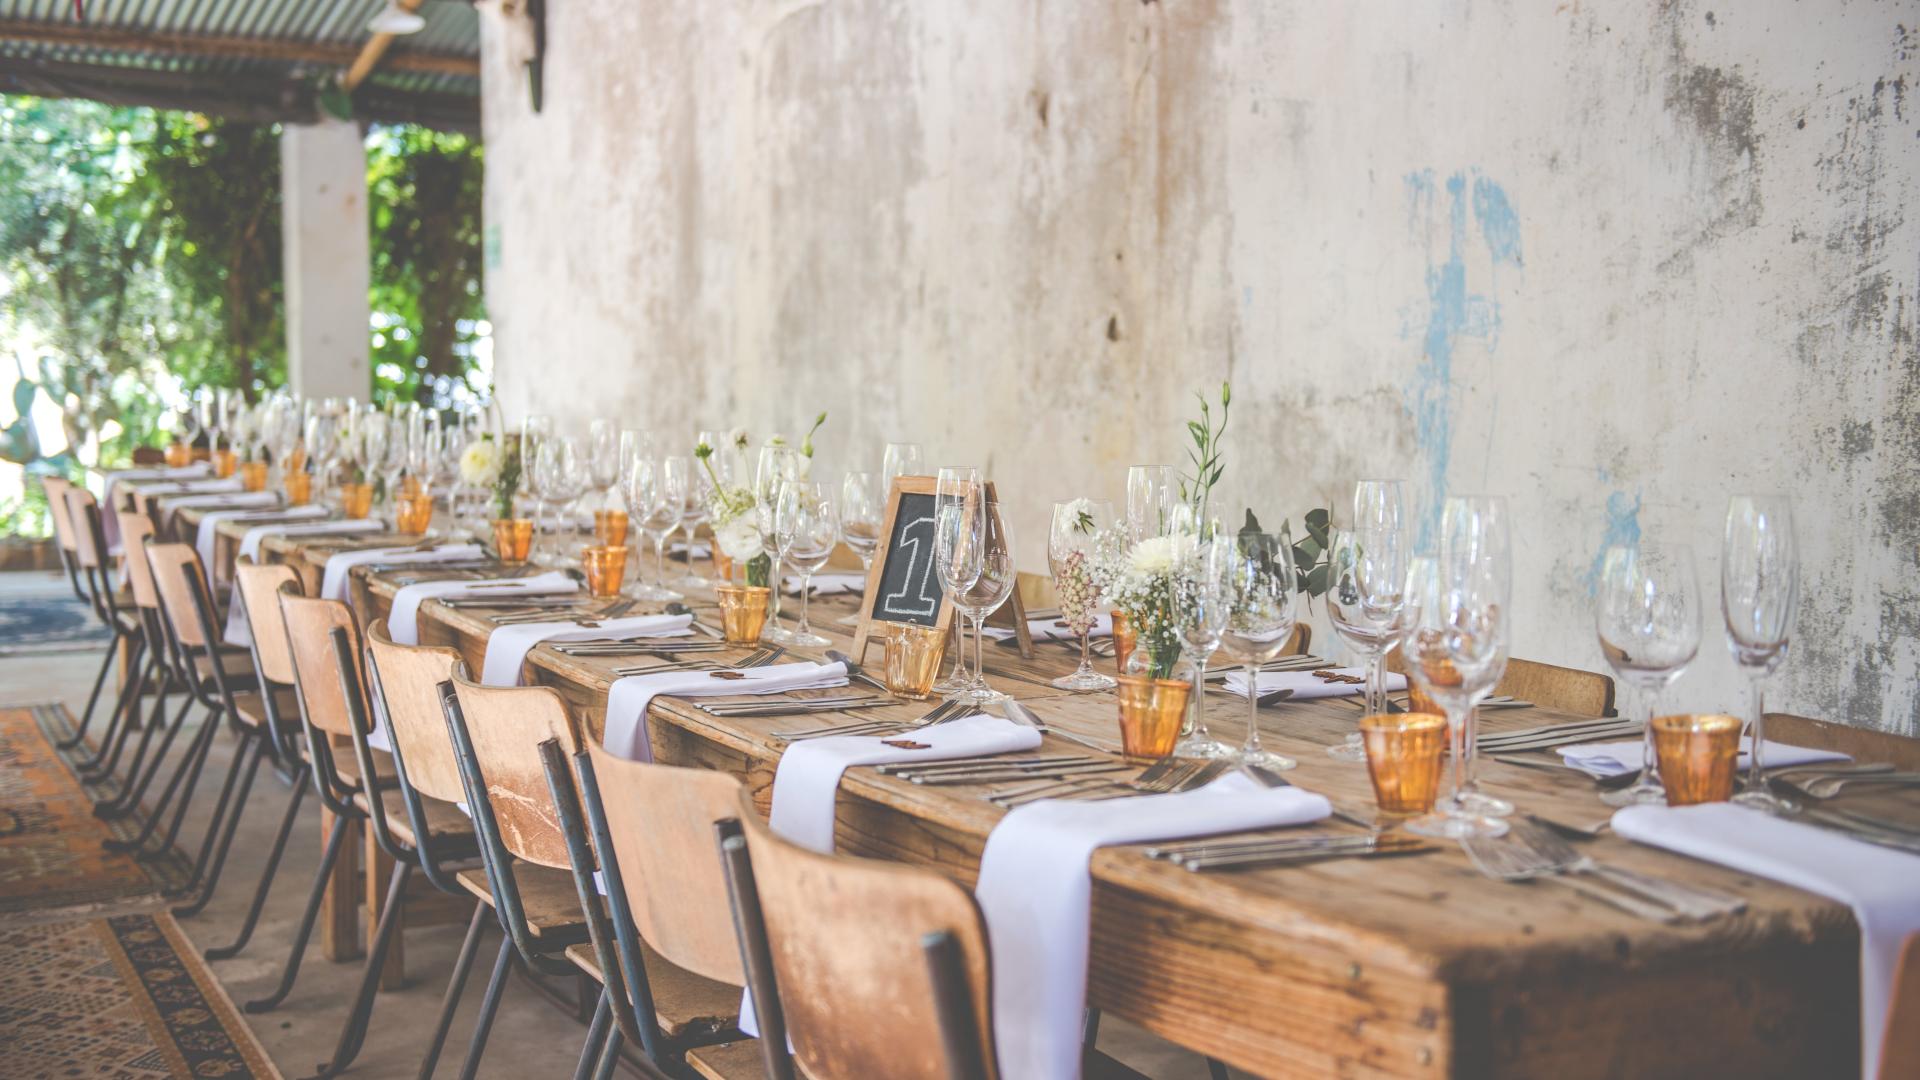 Rustic Wedding Venues for Rent in New York City, NY